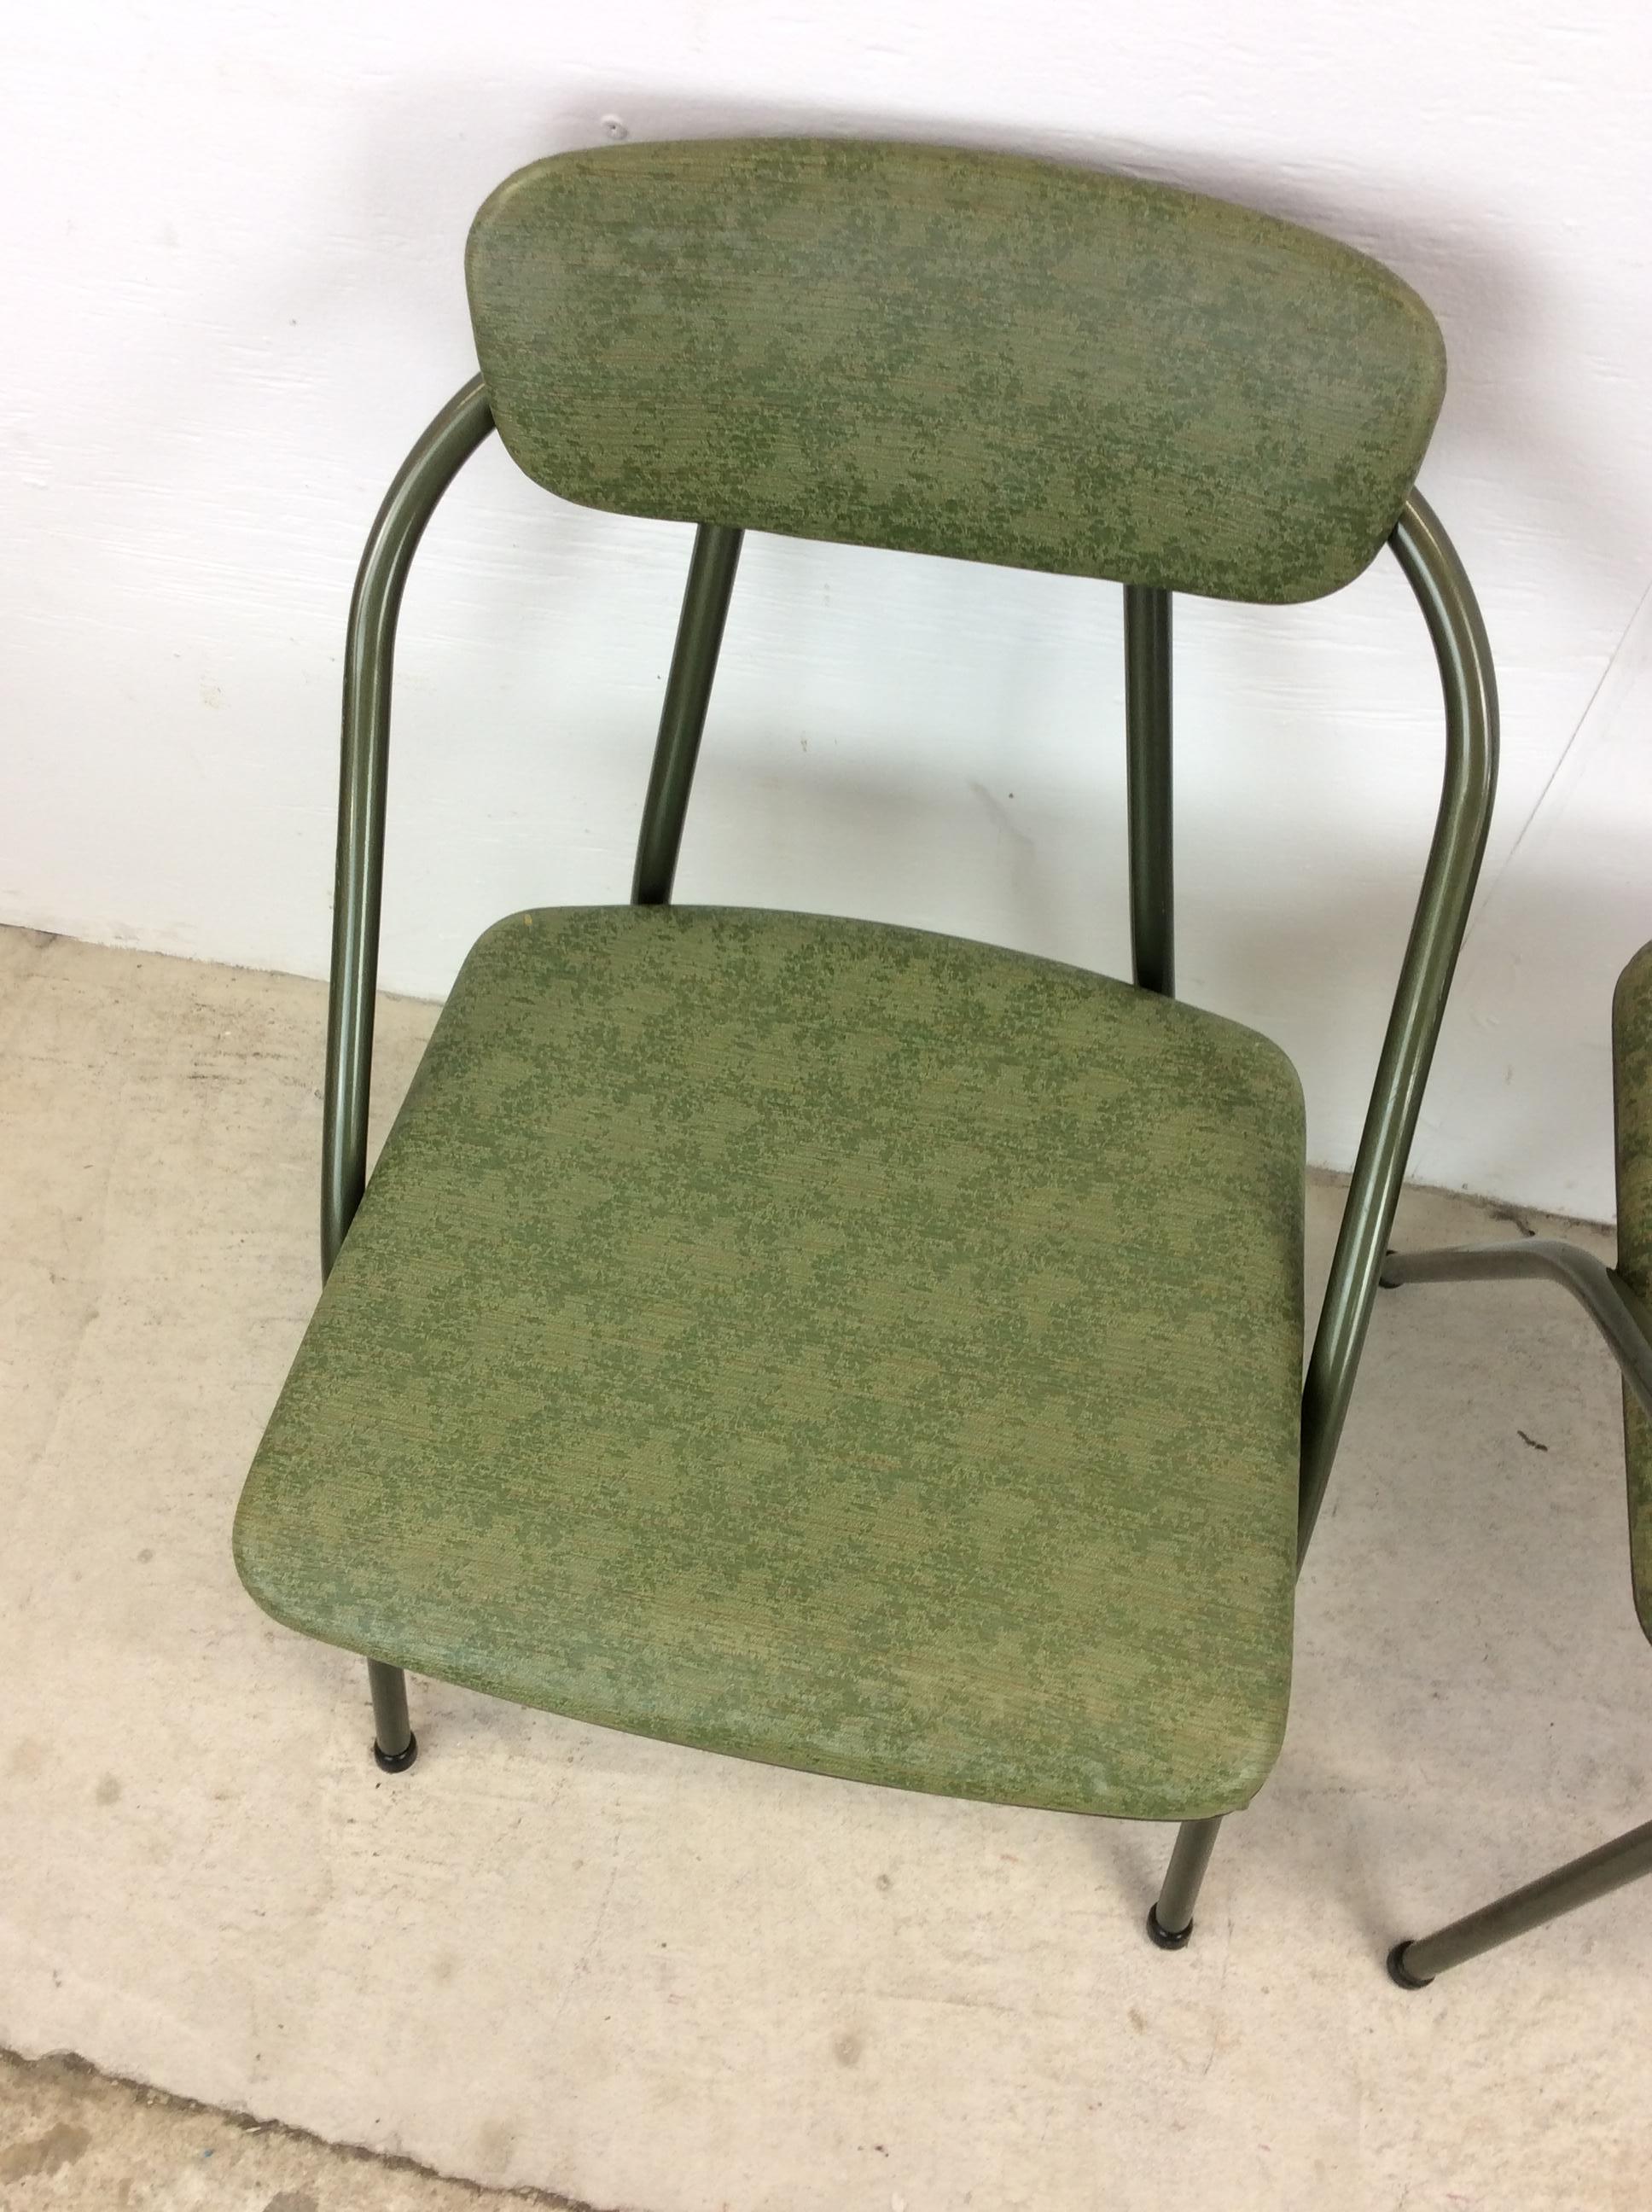 Upholstery Mid Century Modern Folding Chairs with Green Vinyl by Cosco For Sale